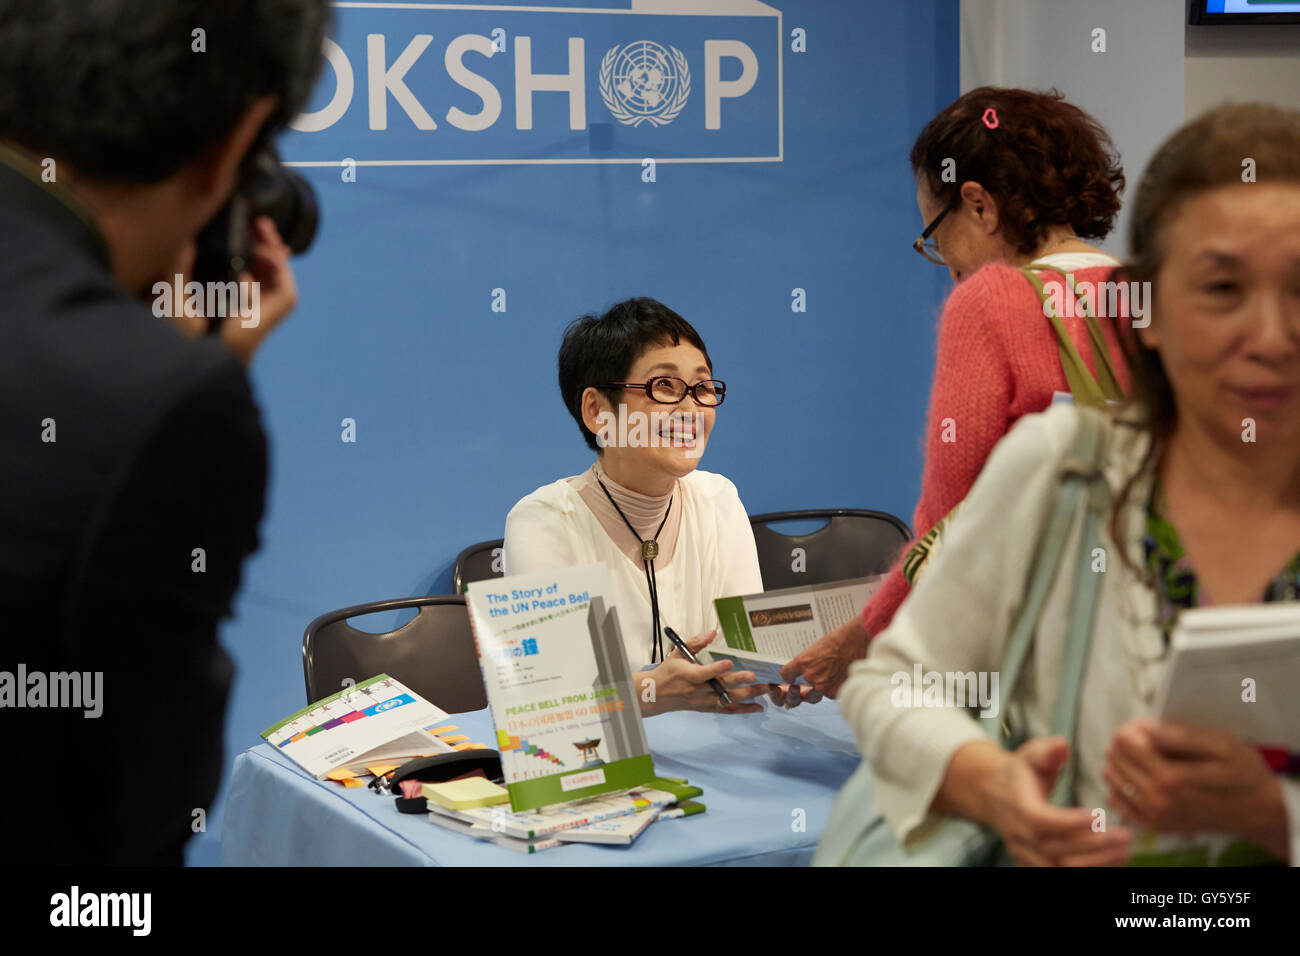 New York, United States. 16th Sep, 2016. Author Seiko Takase, signs books and greeted guest at the UN Book Store on the International Day of Peace. Seiko Takase shares with us her father Chiyoji Nakagawa project known as the “Peace Bell” on the 35th Anniversary of the International Day of Peace. Credit:  Mark J Sullivan/Pacific Press/Alamy Live News Stock Photo